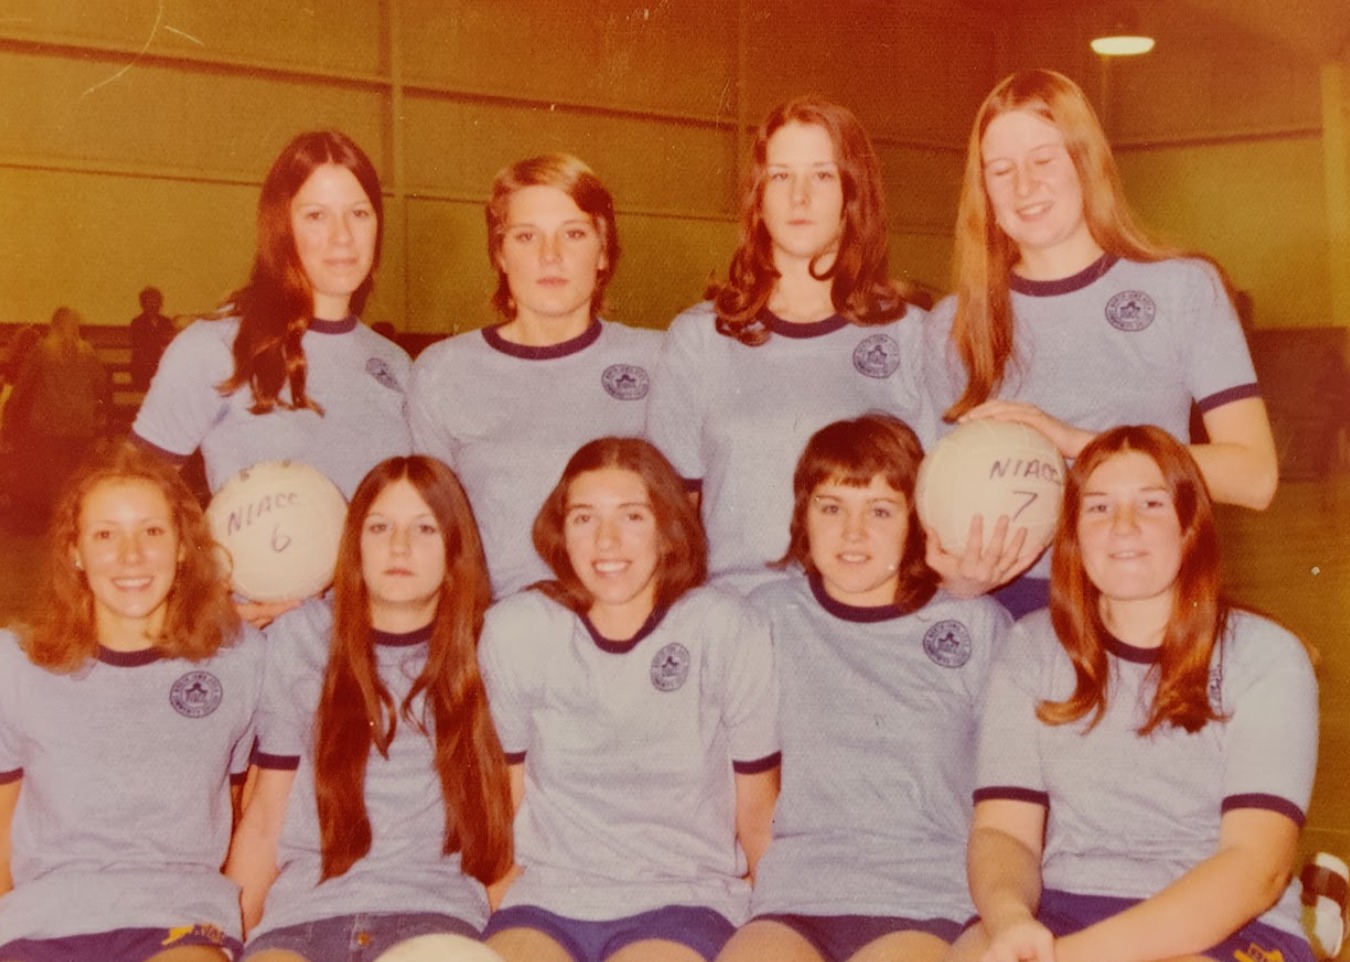 The first-ever NIACC volleyball team in 1973.